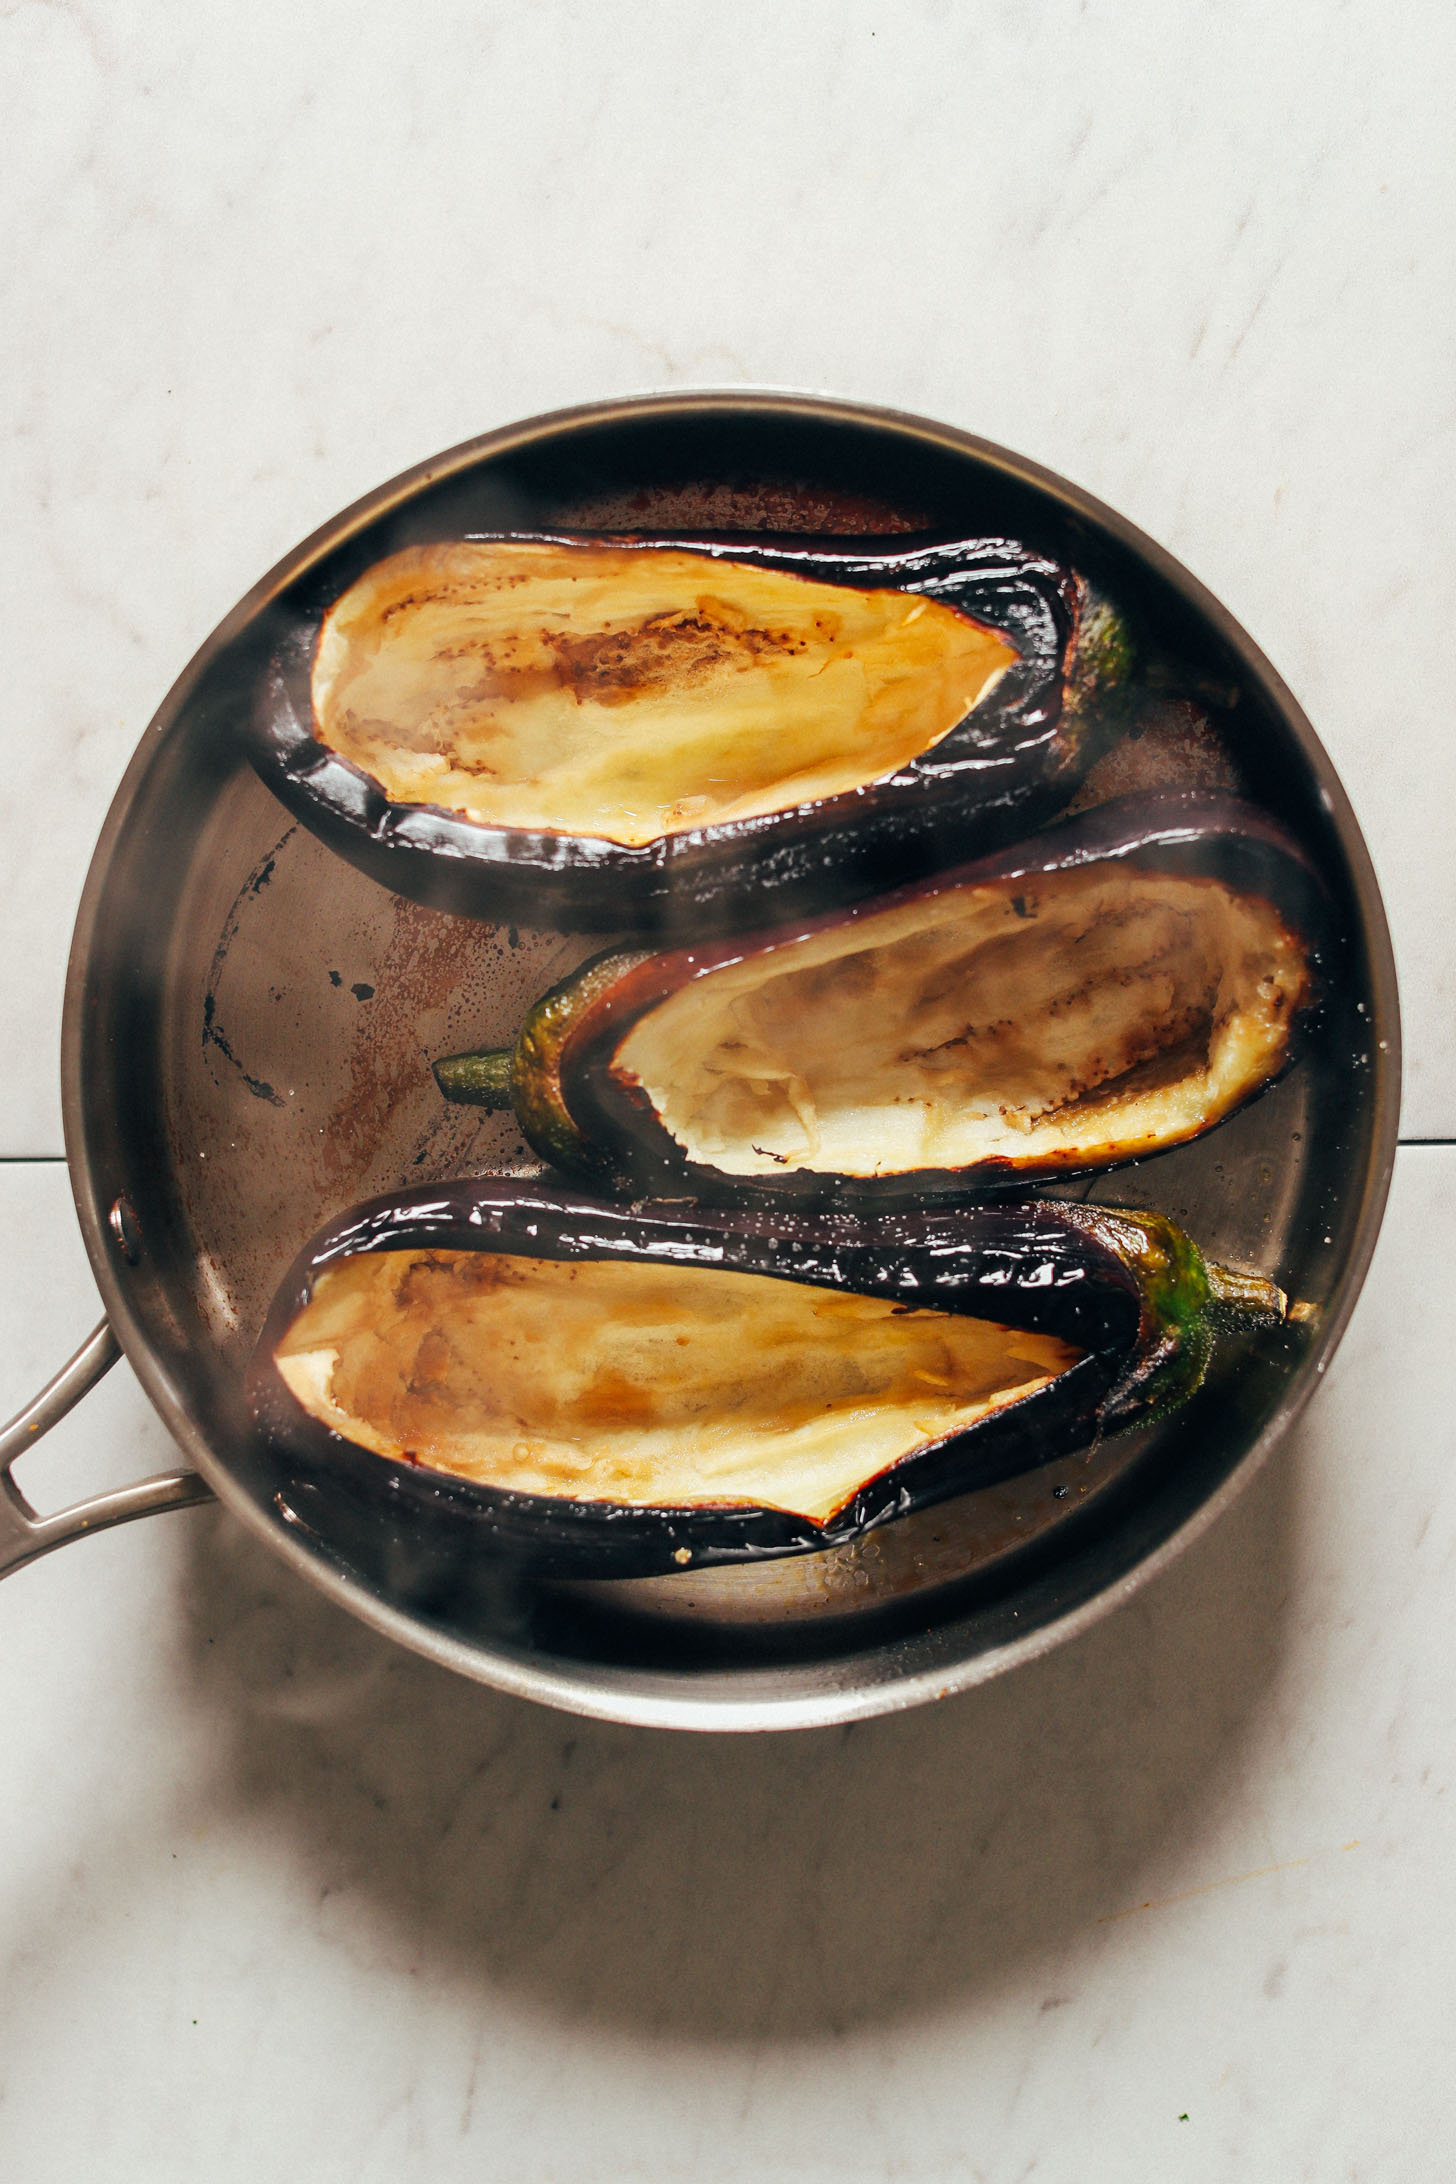 Nicely charred eggplants in a large saute pan